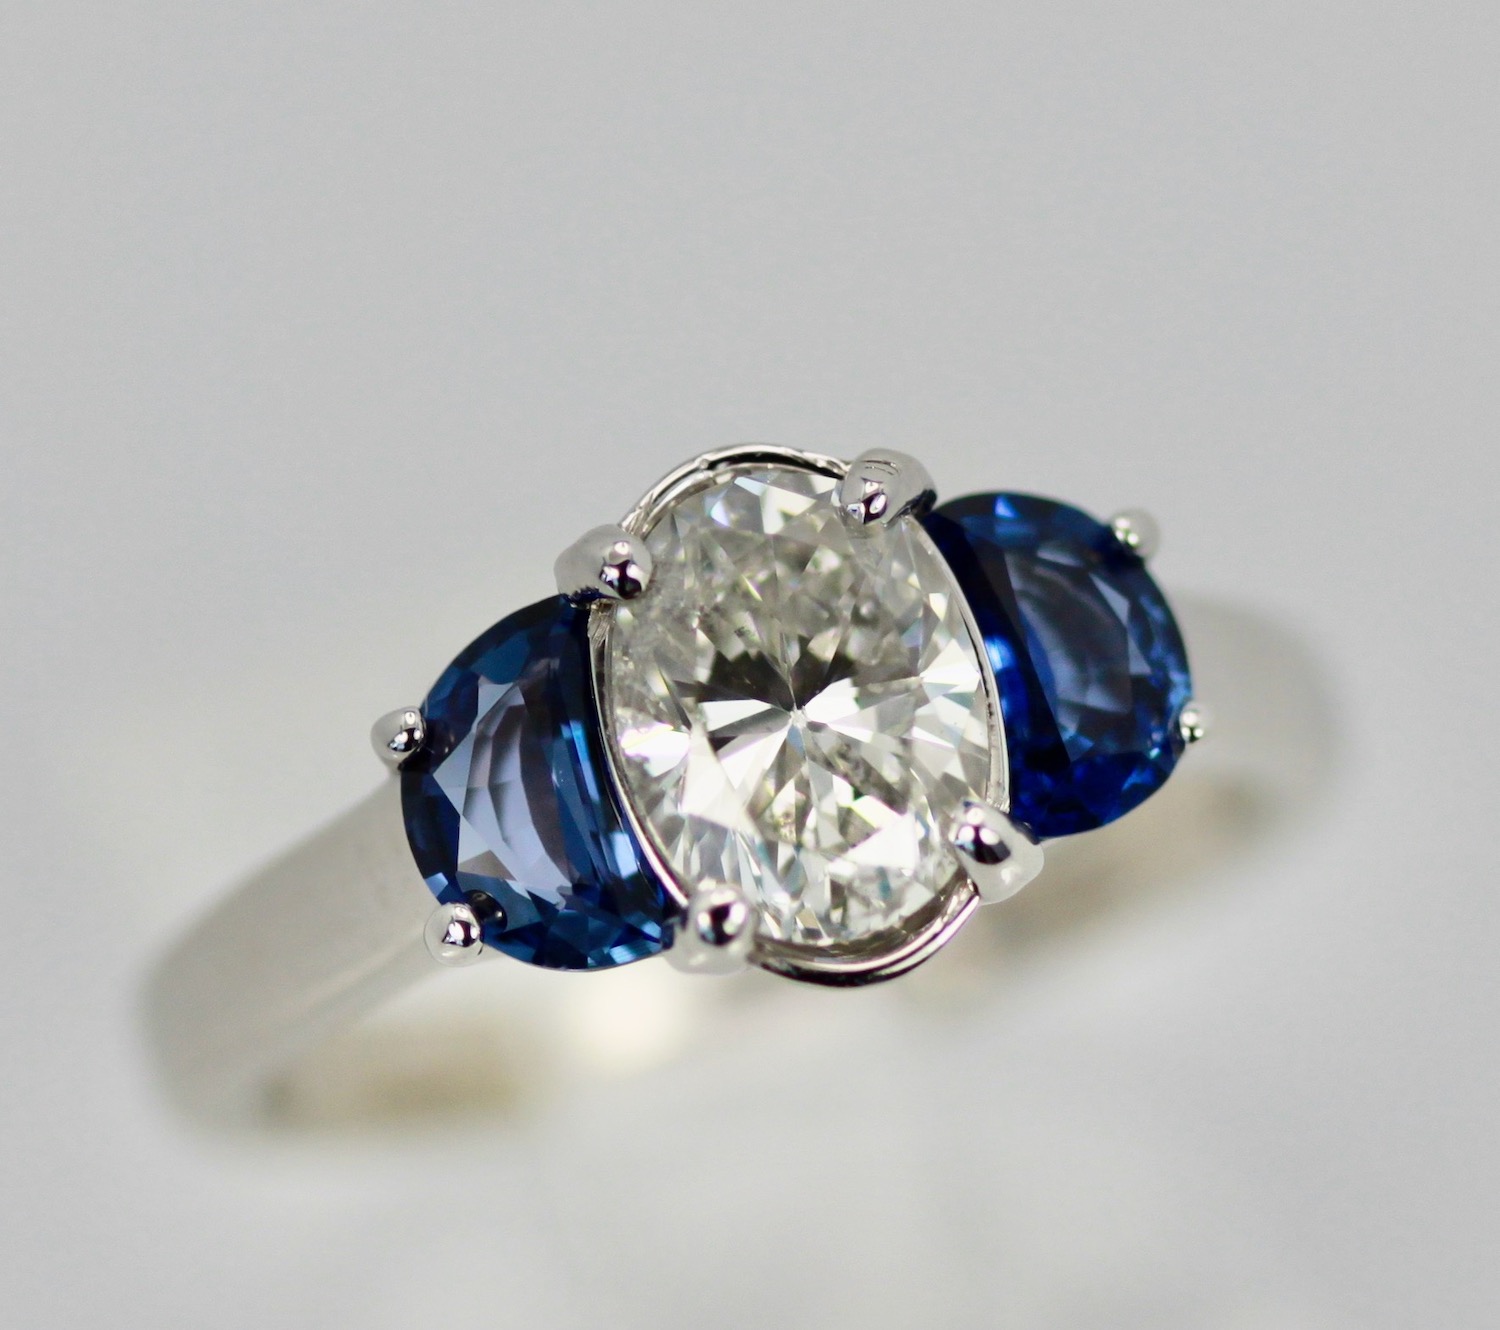 Diamond Ring with Half Moon Sapphire Sides – close up